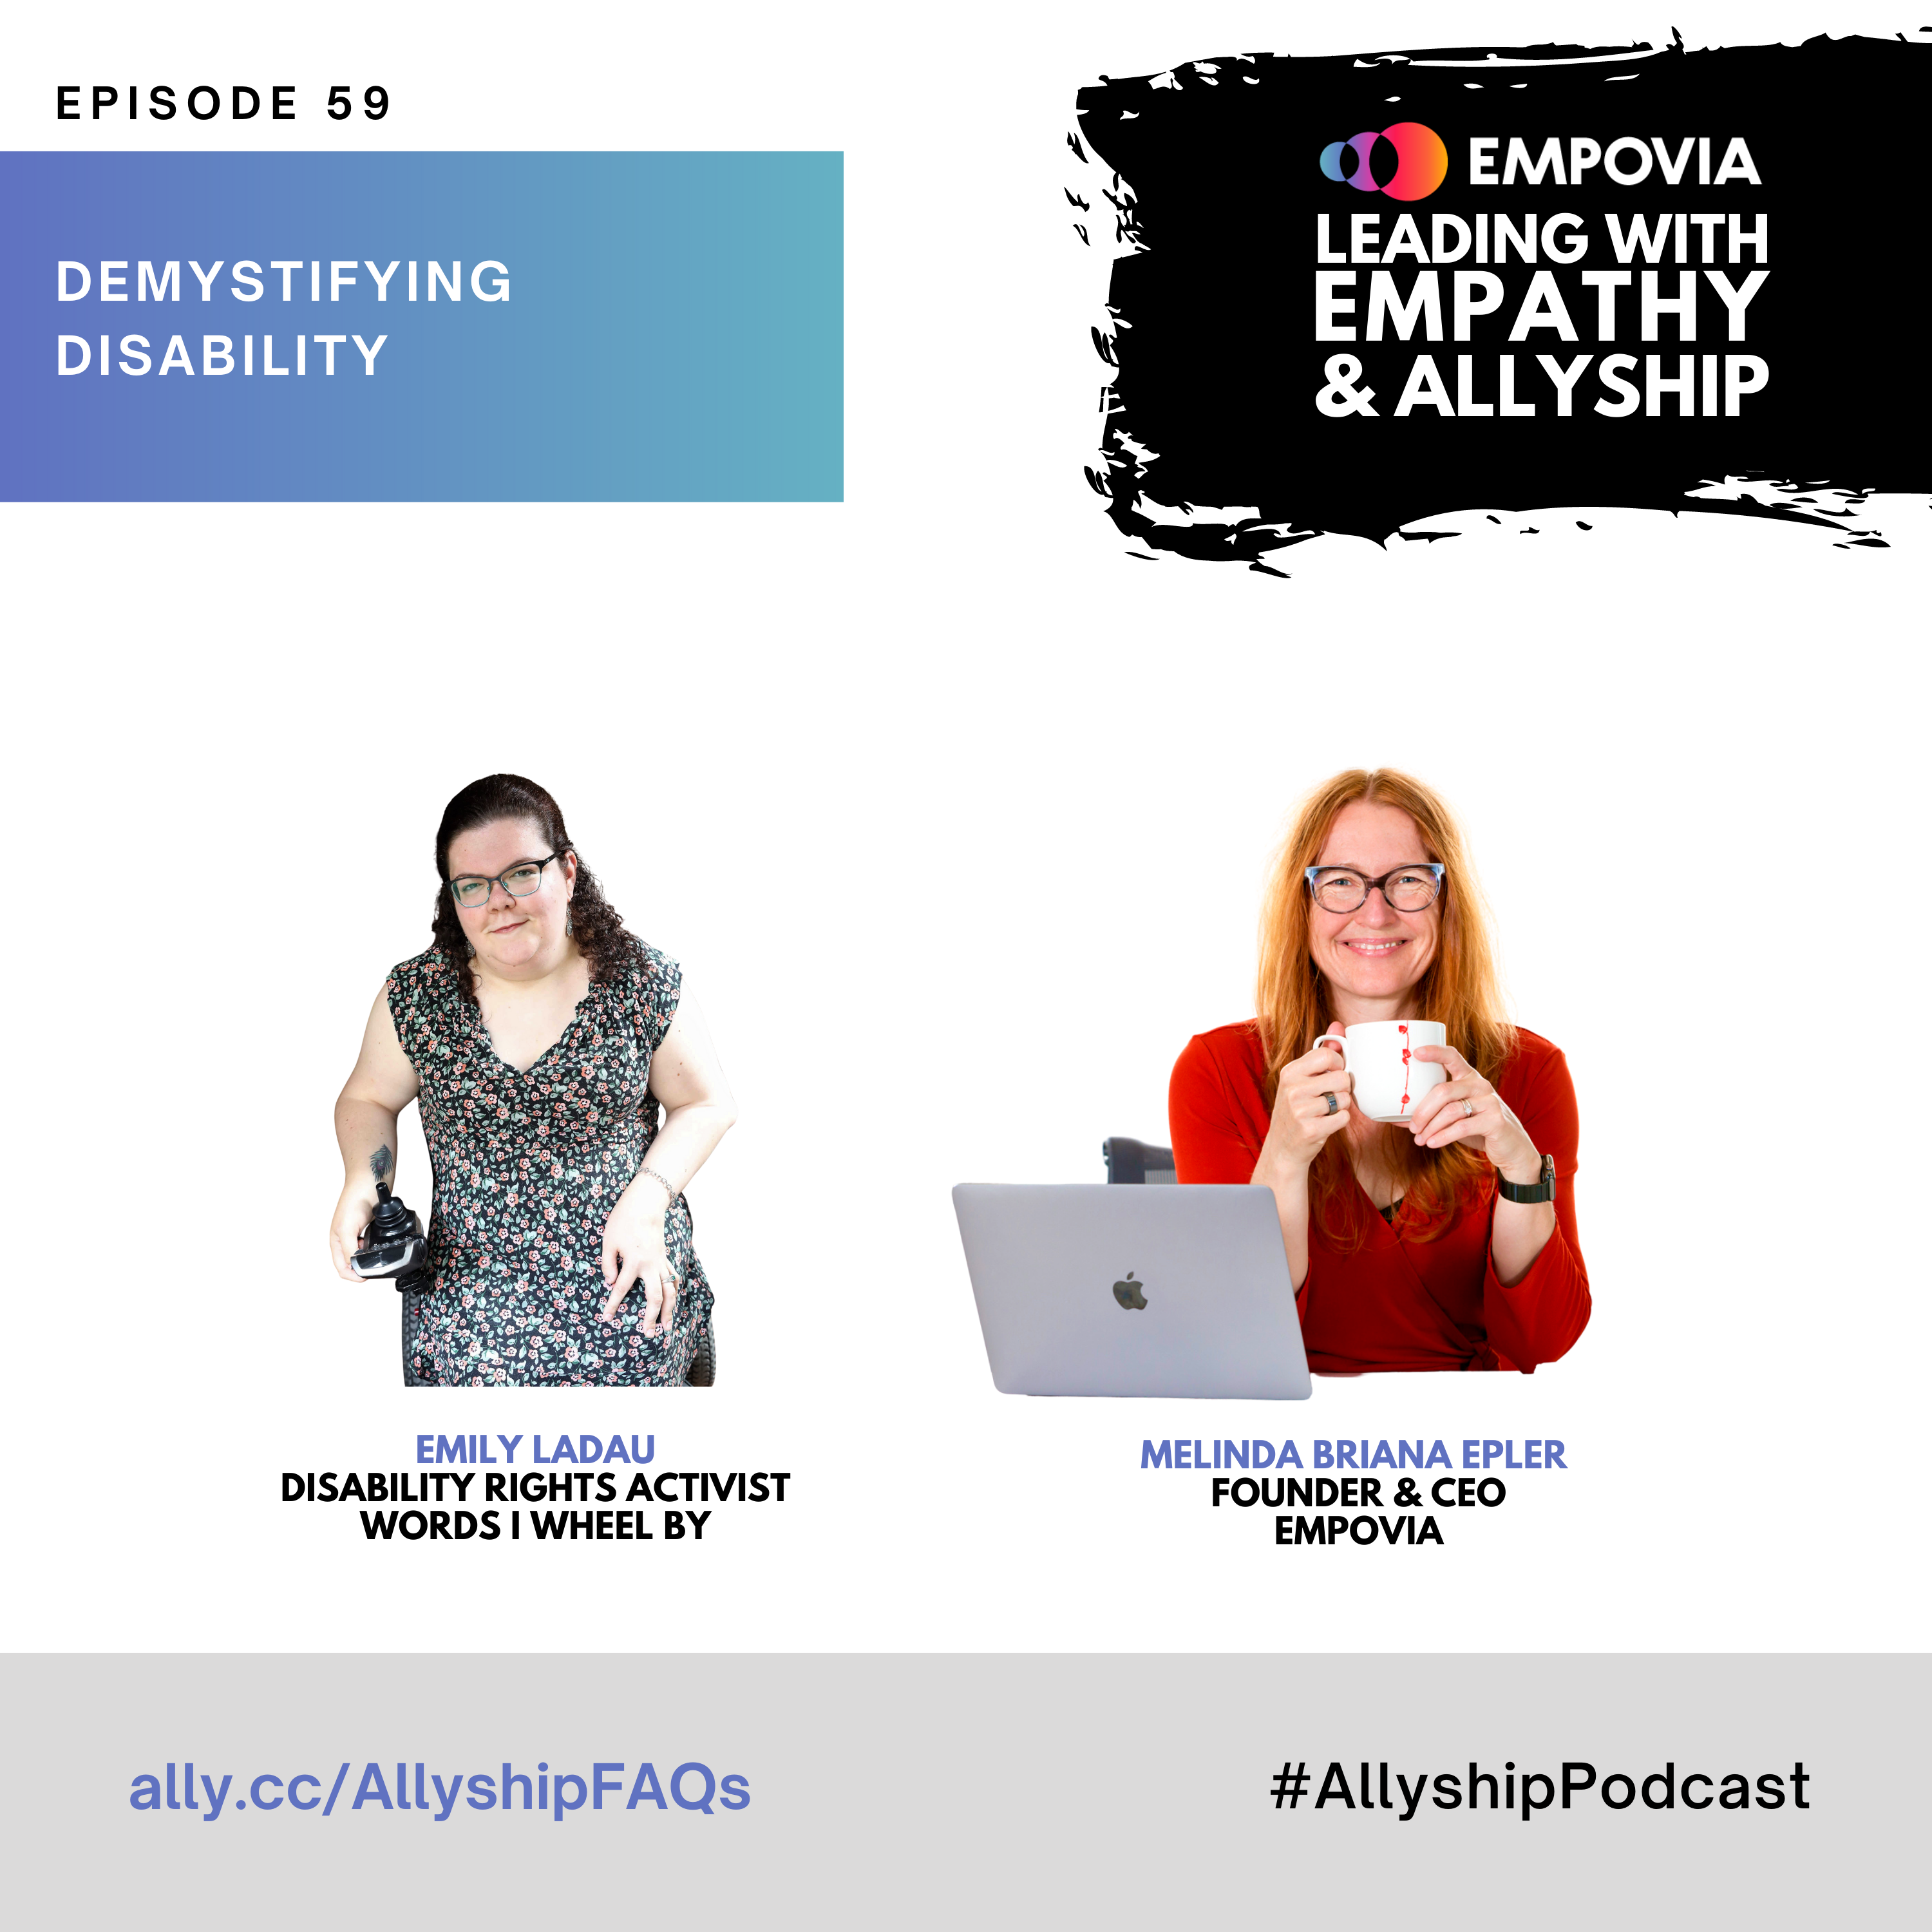 Leading With Empathy & Allyship promo with the Empovia logo and photos of Emily Ladau; a White woman who is wearing glasses and has curly brown hair pulled back halfway, with the rest framing her face. She is wearing a black dress dotted with red flowers and green leaves. She is sitting in a power wheelchair, facing the camera, and smiling. One of her hands is resting in her lap and the other hand is resting on the joystick of her wheelchair, turned so that a tattoo of a peacock feather is visible on her inner arm; and host Melinda Briana Epler; a White woman with red hair, glasses, and orange shirt holding a white mug behind a laptop.